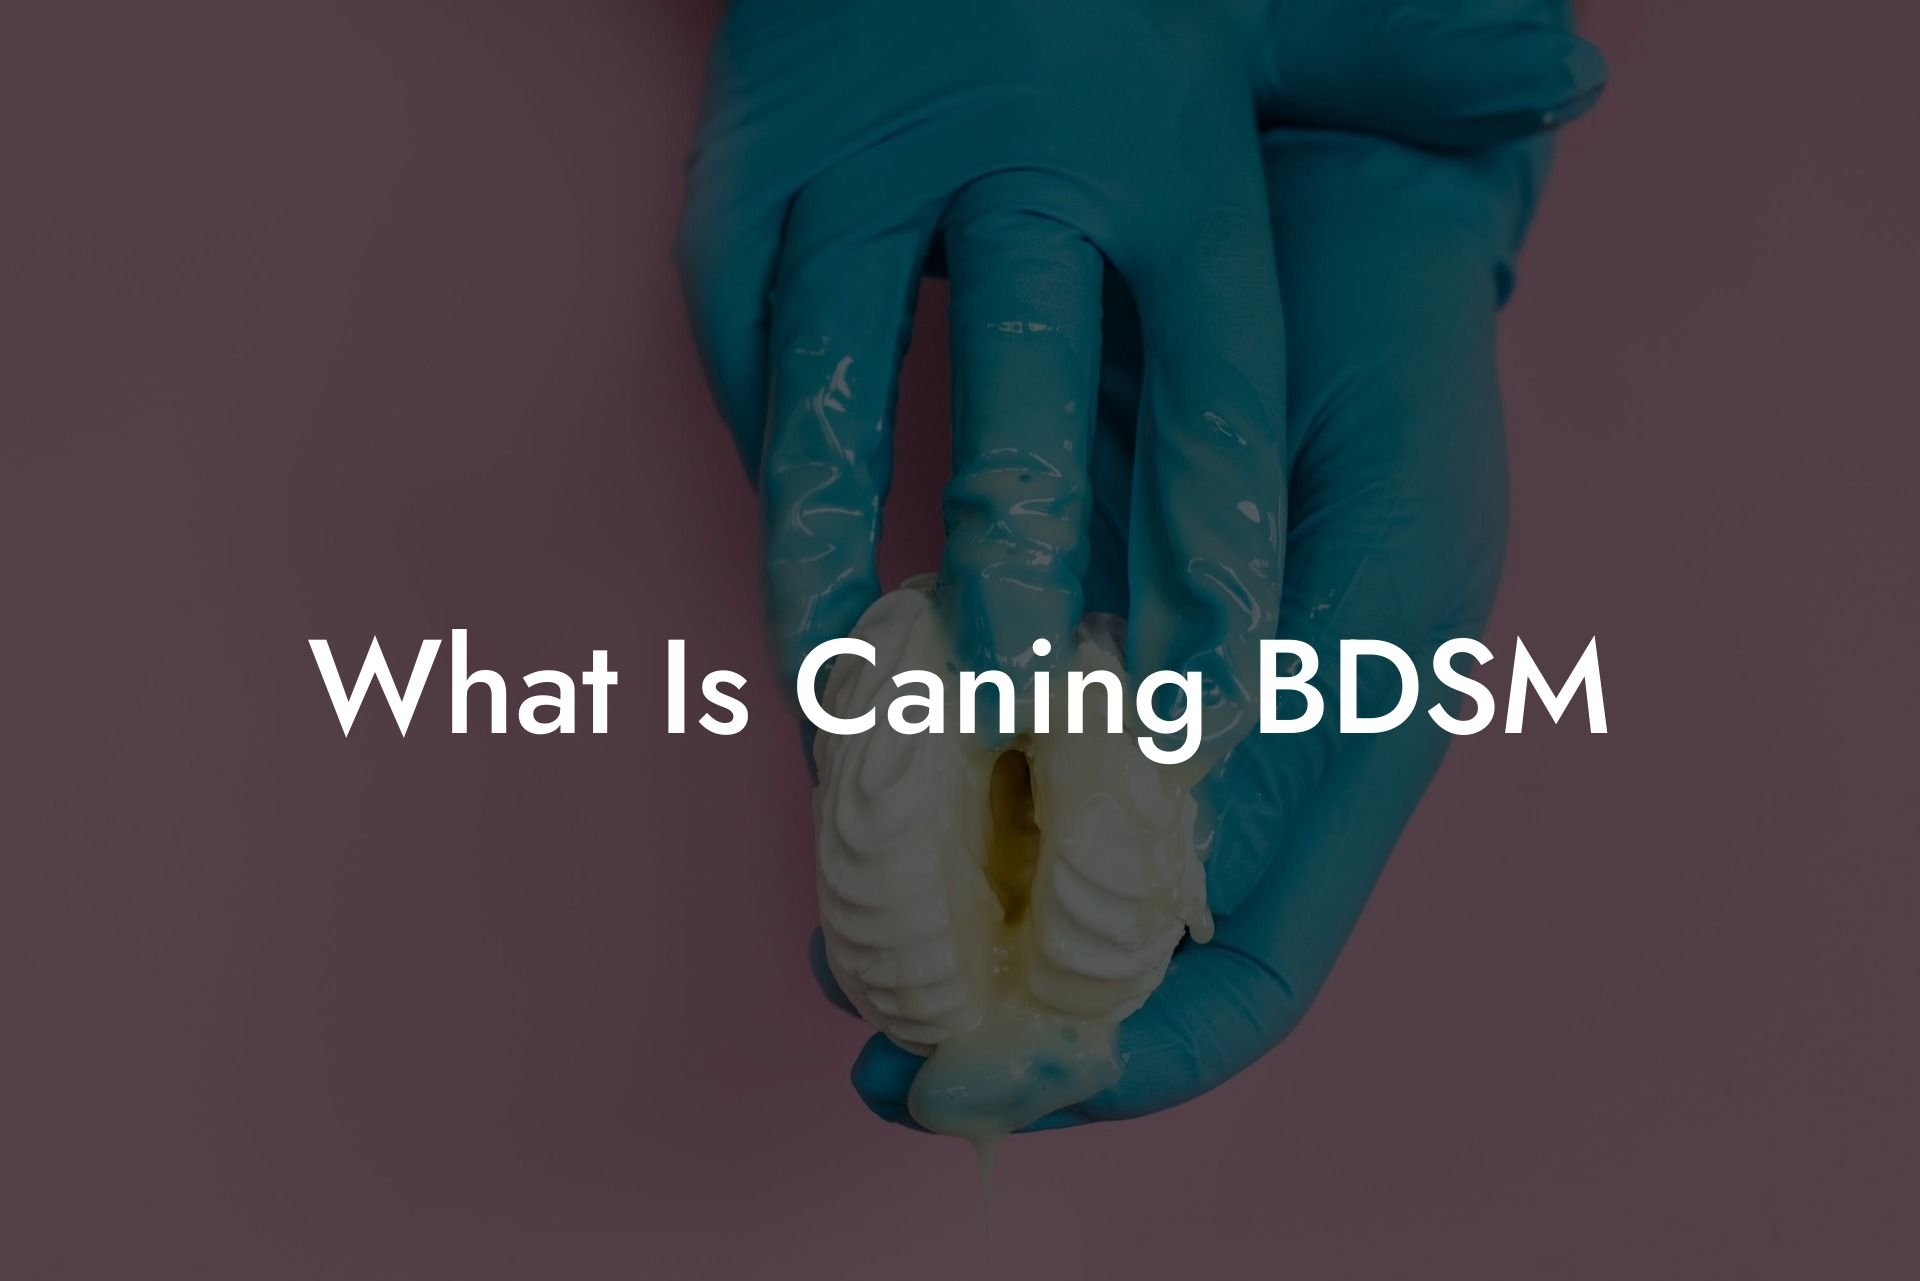 What Is Caning BDSM